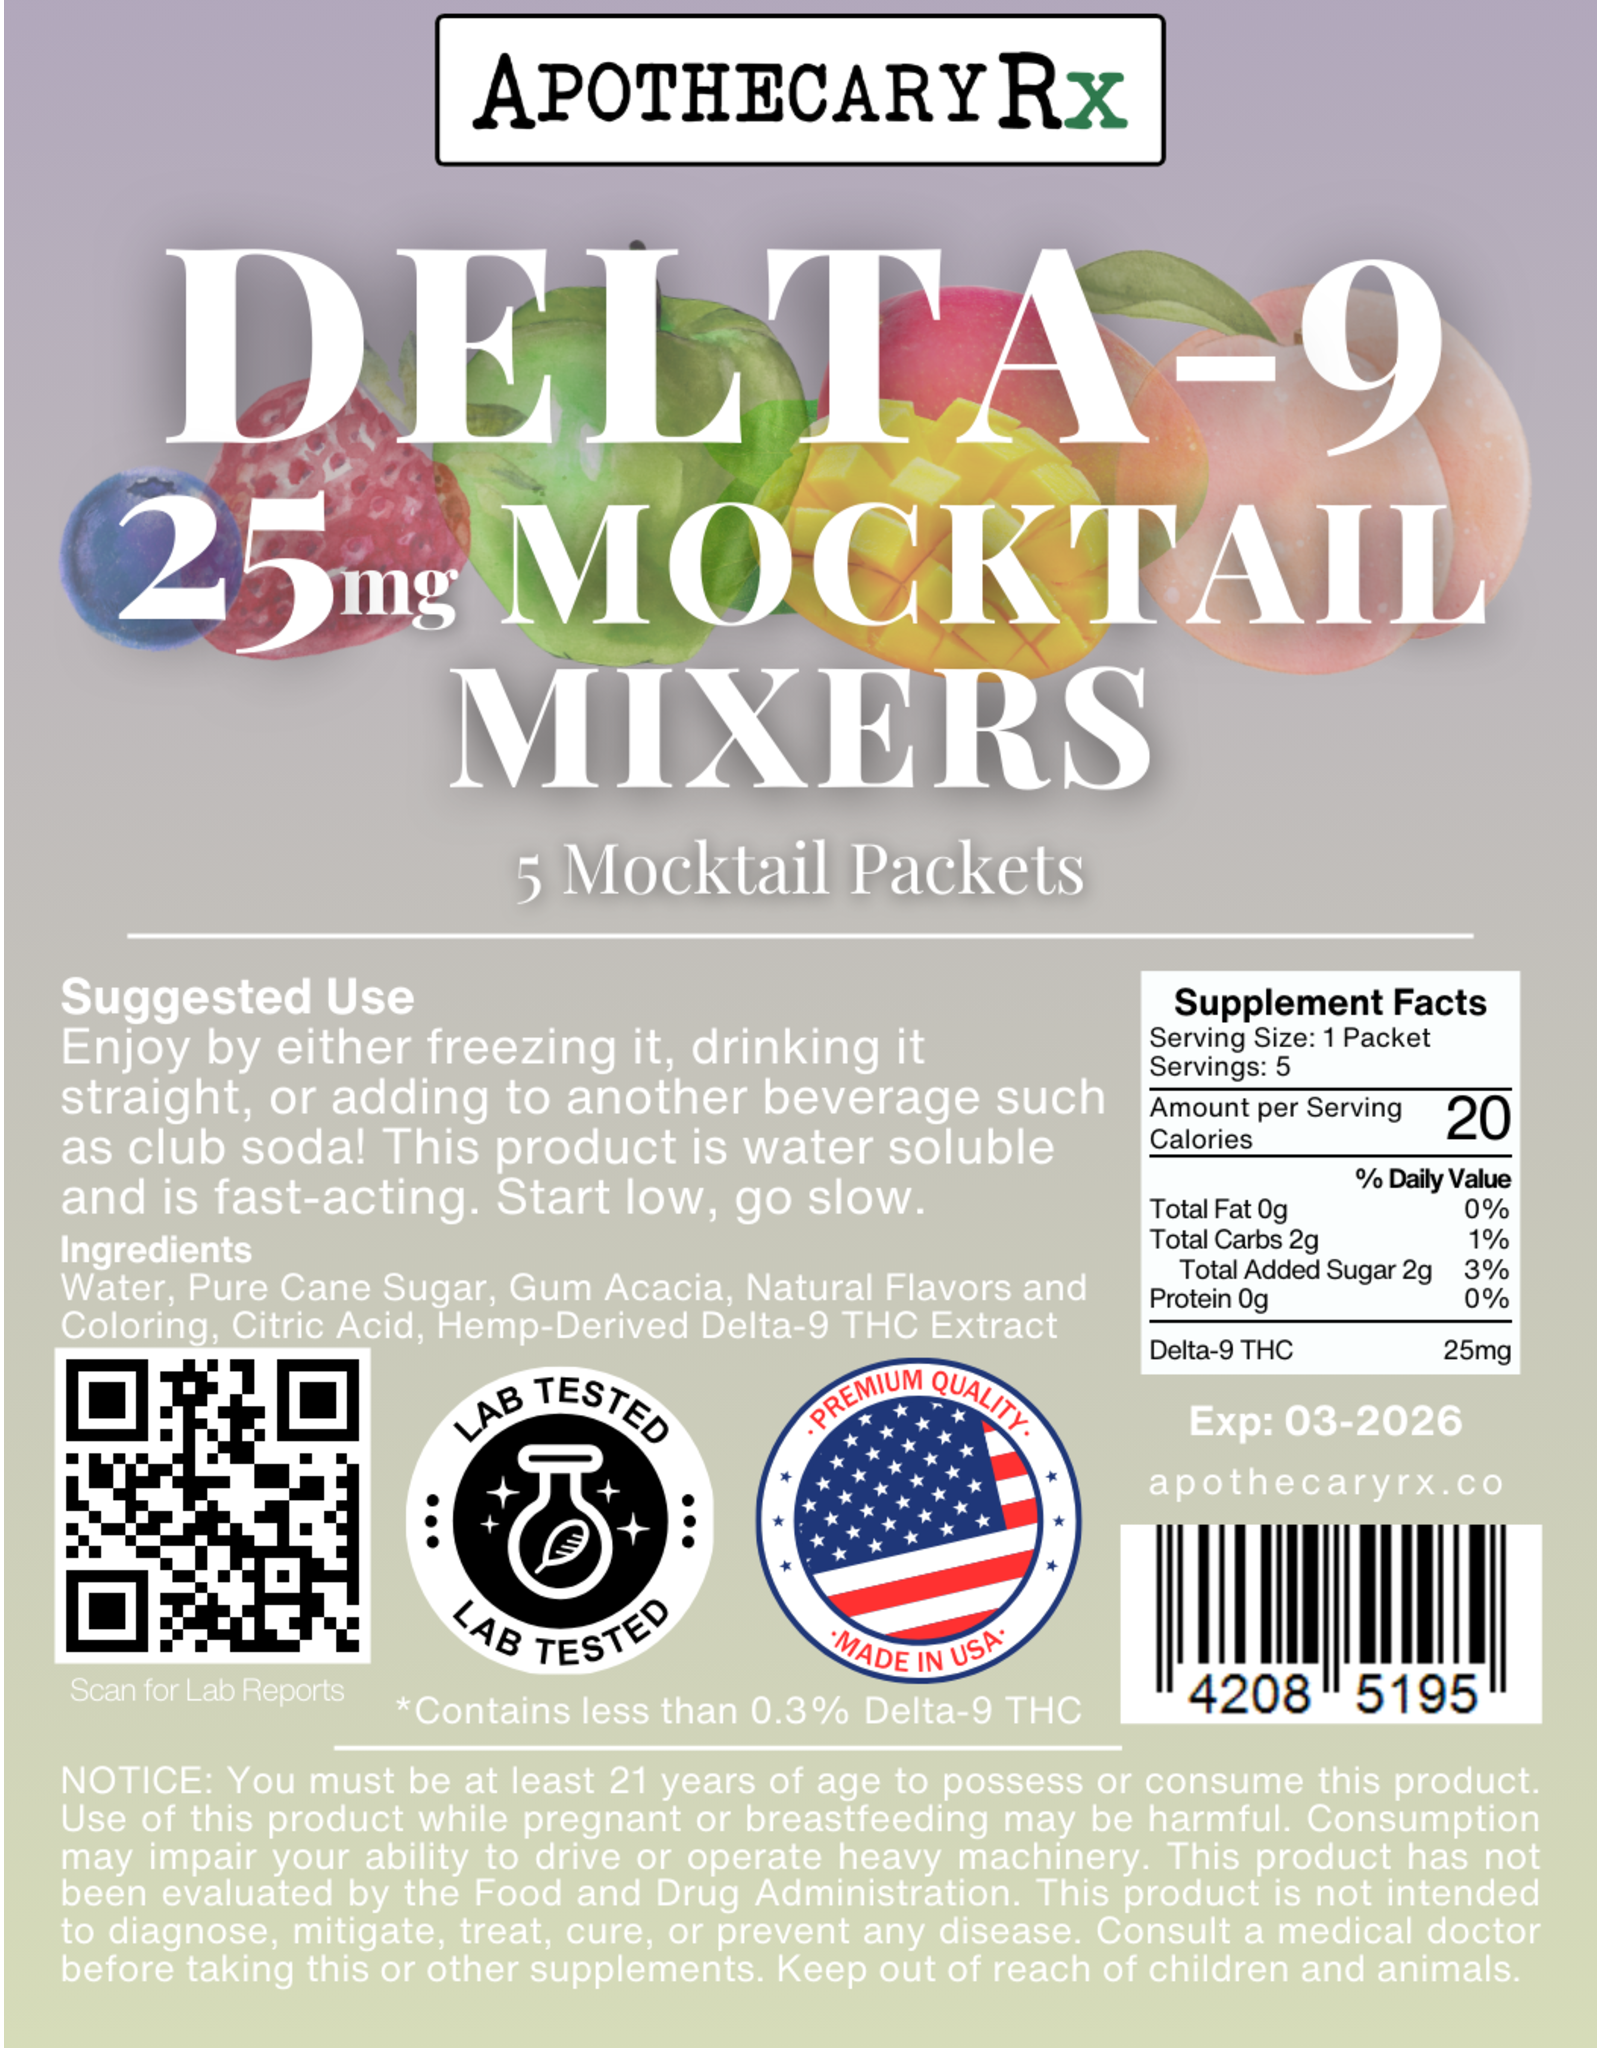 Apothecary Rx Apothecary Rx Delta-9 Mocktail Mixers 25mg 5ct